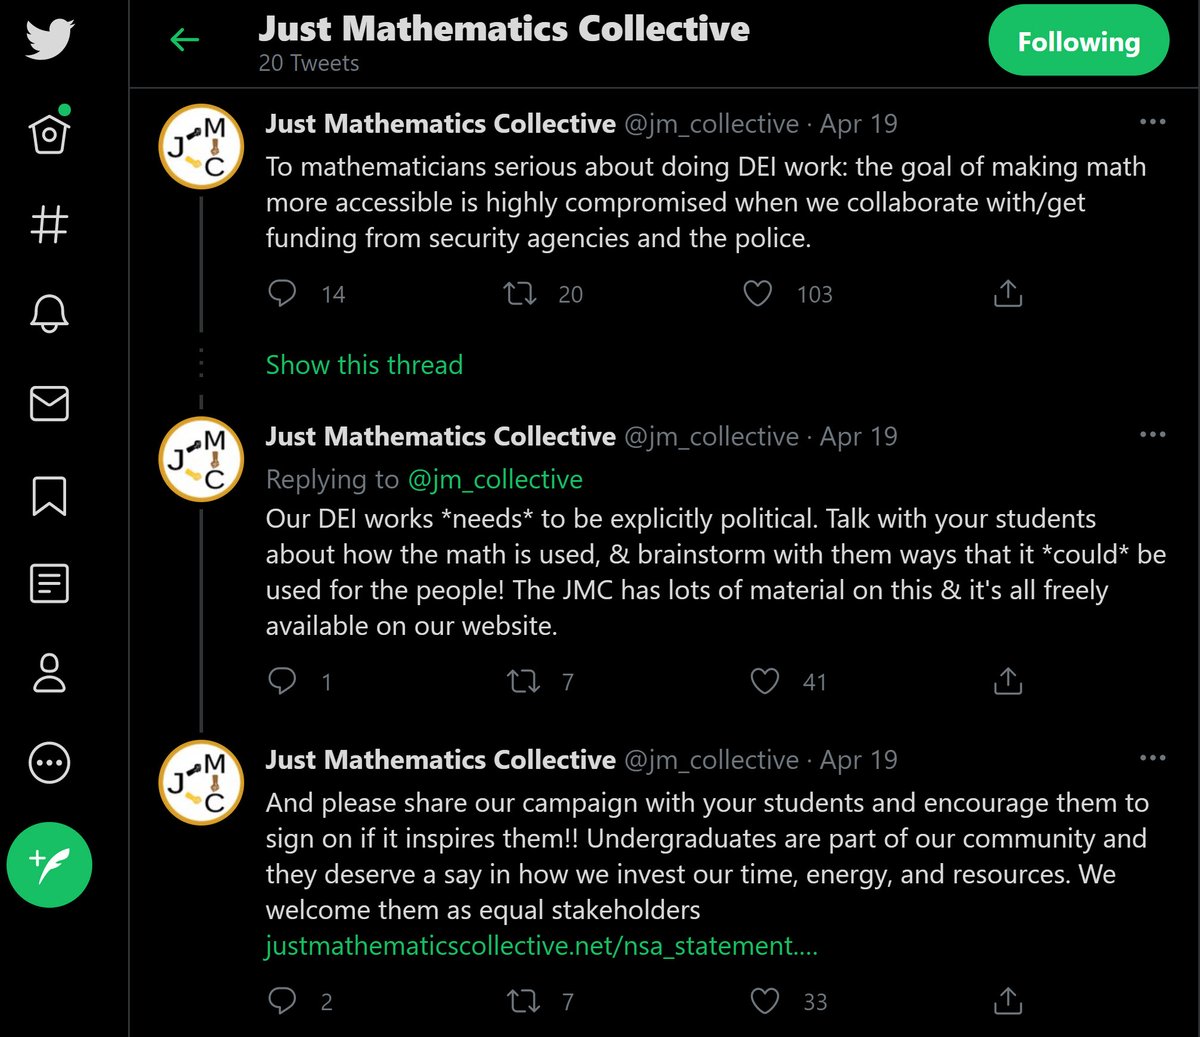 6/ sadly, they imply that a mathematician cannot be a “true ally” working towards the goals of diversity, inclusion, & equity if they have any connection to the  @NSAGov, etc. this is dismissive of we who strive for div/incl/eq via teaching, mentoring, & more.